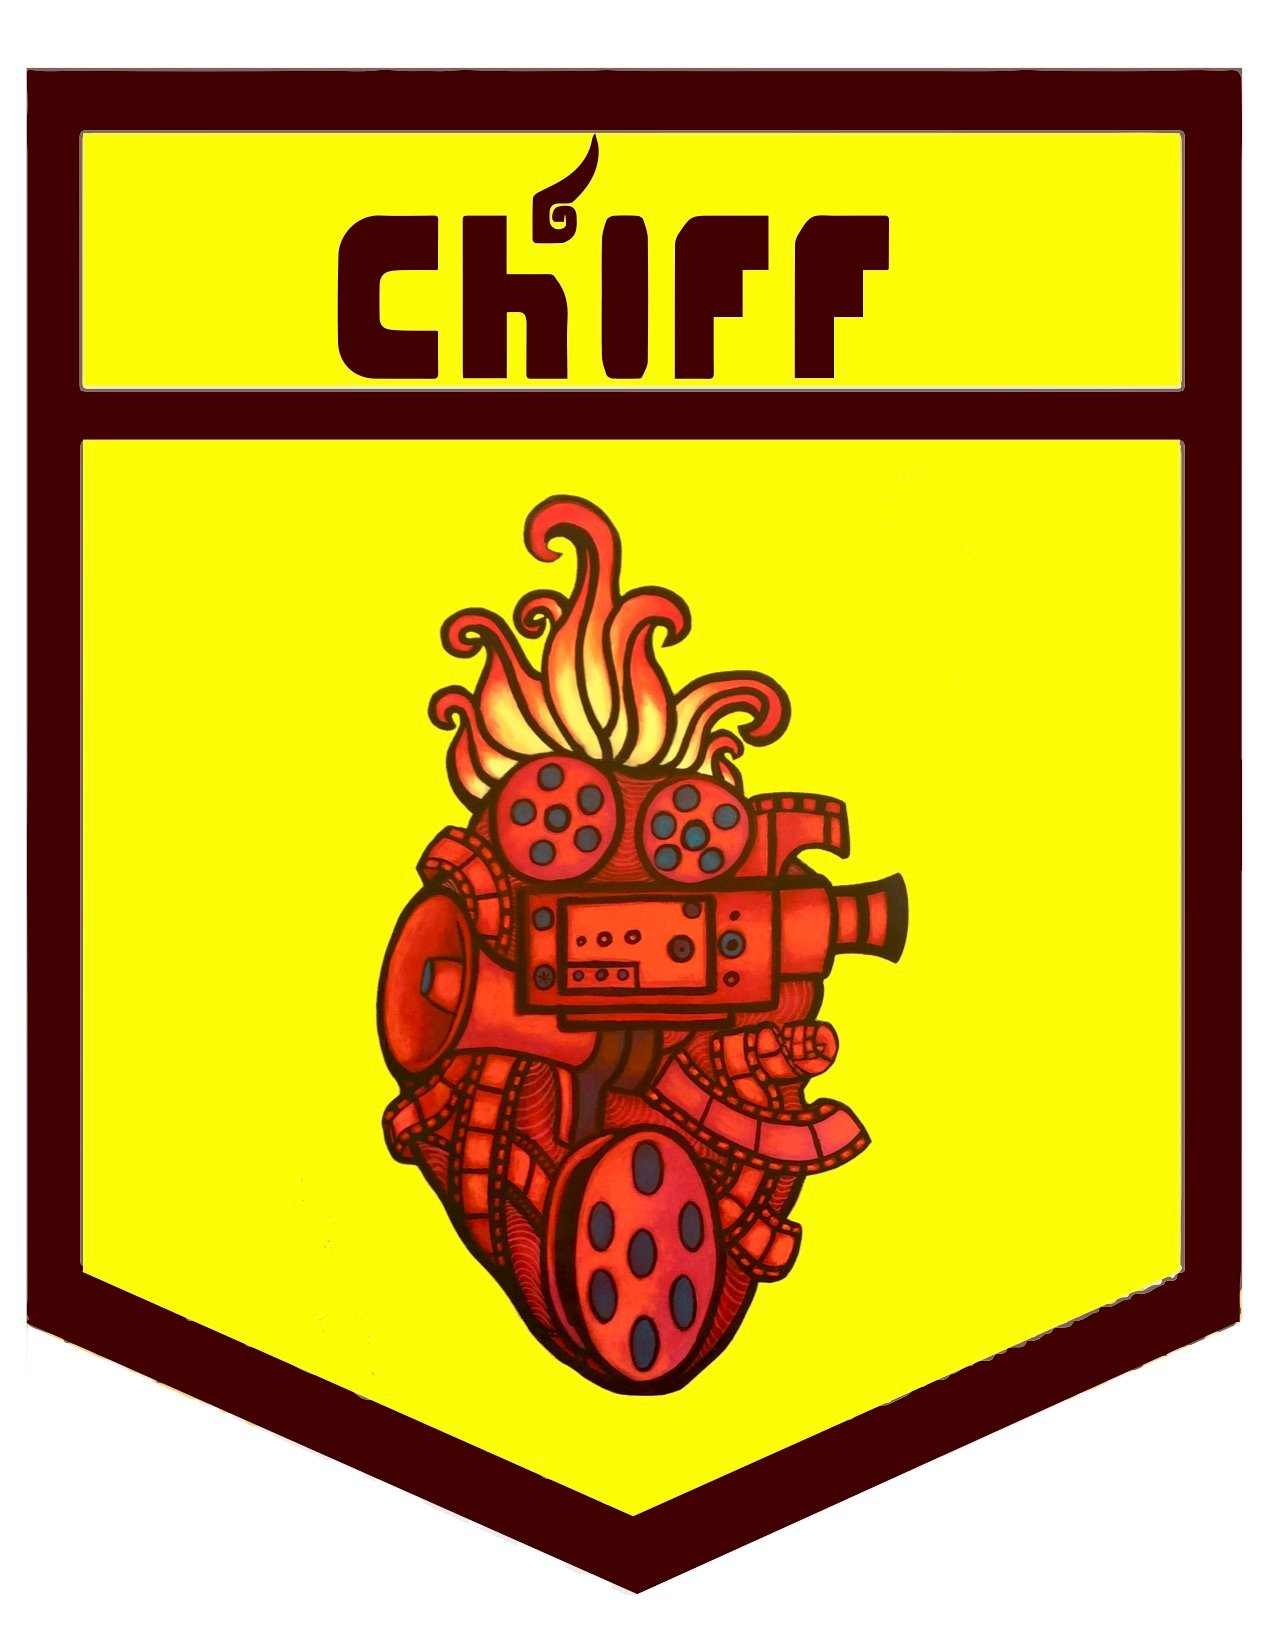 For over 20 years, CHIFF has celebrated and advanced the understanding of Chicano history, culture, and expression through the art of film.